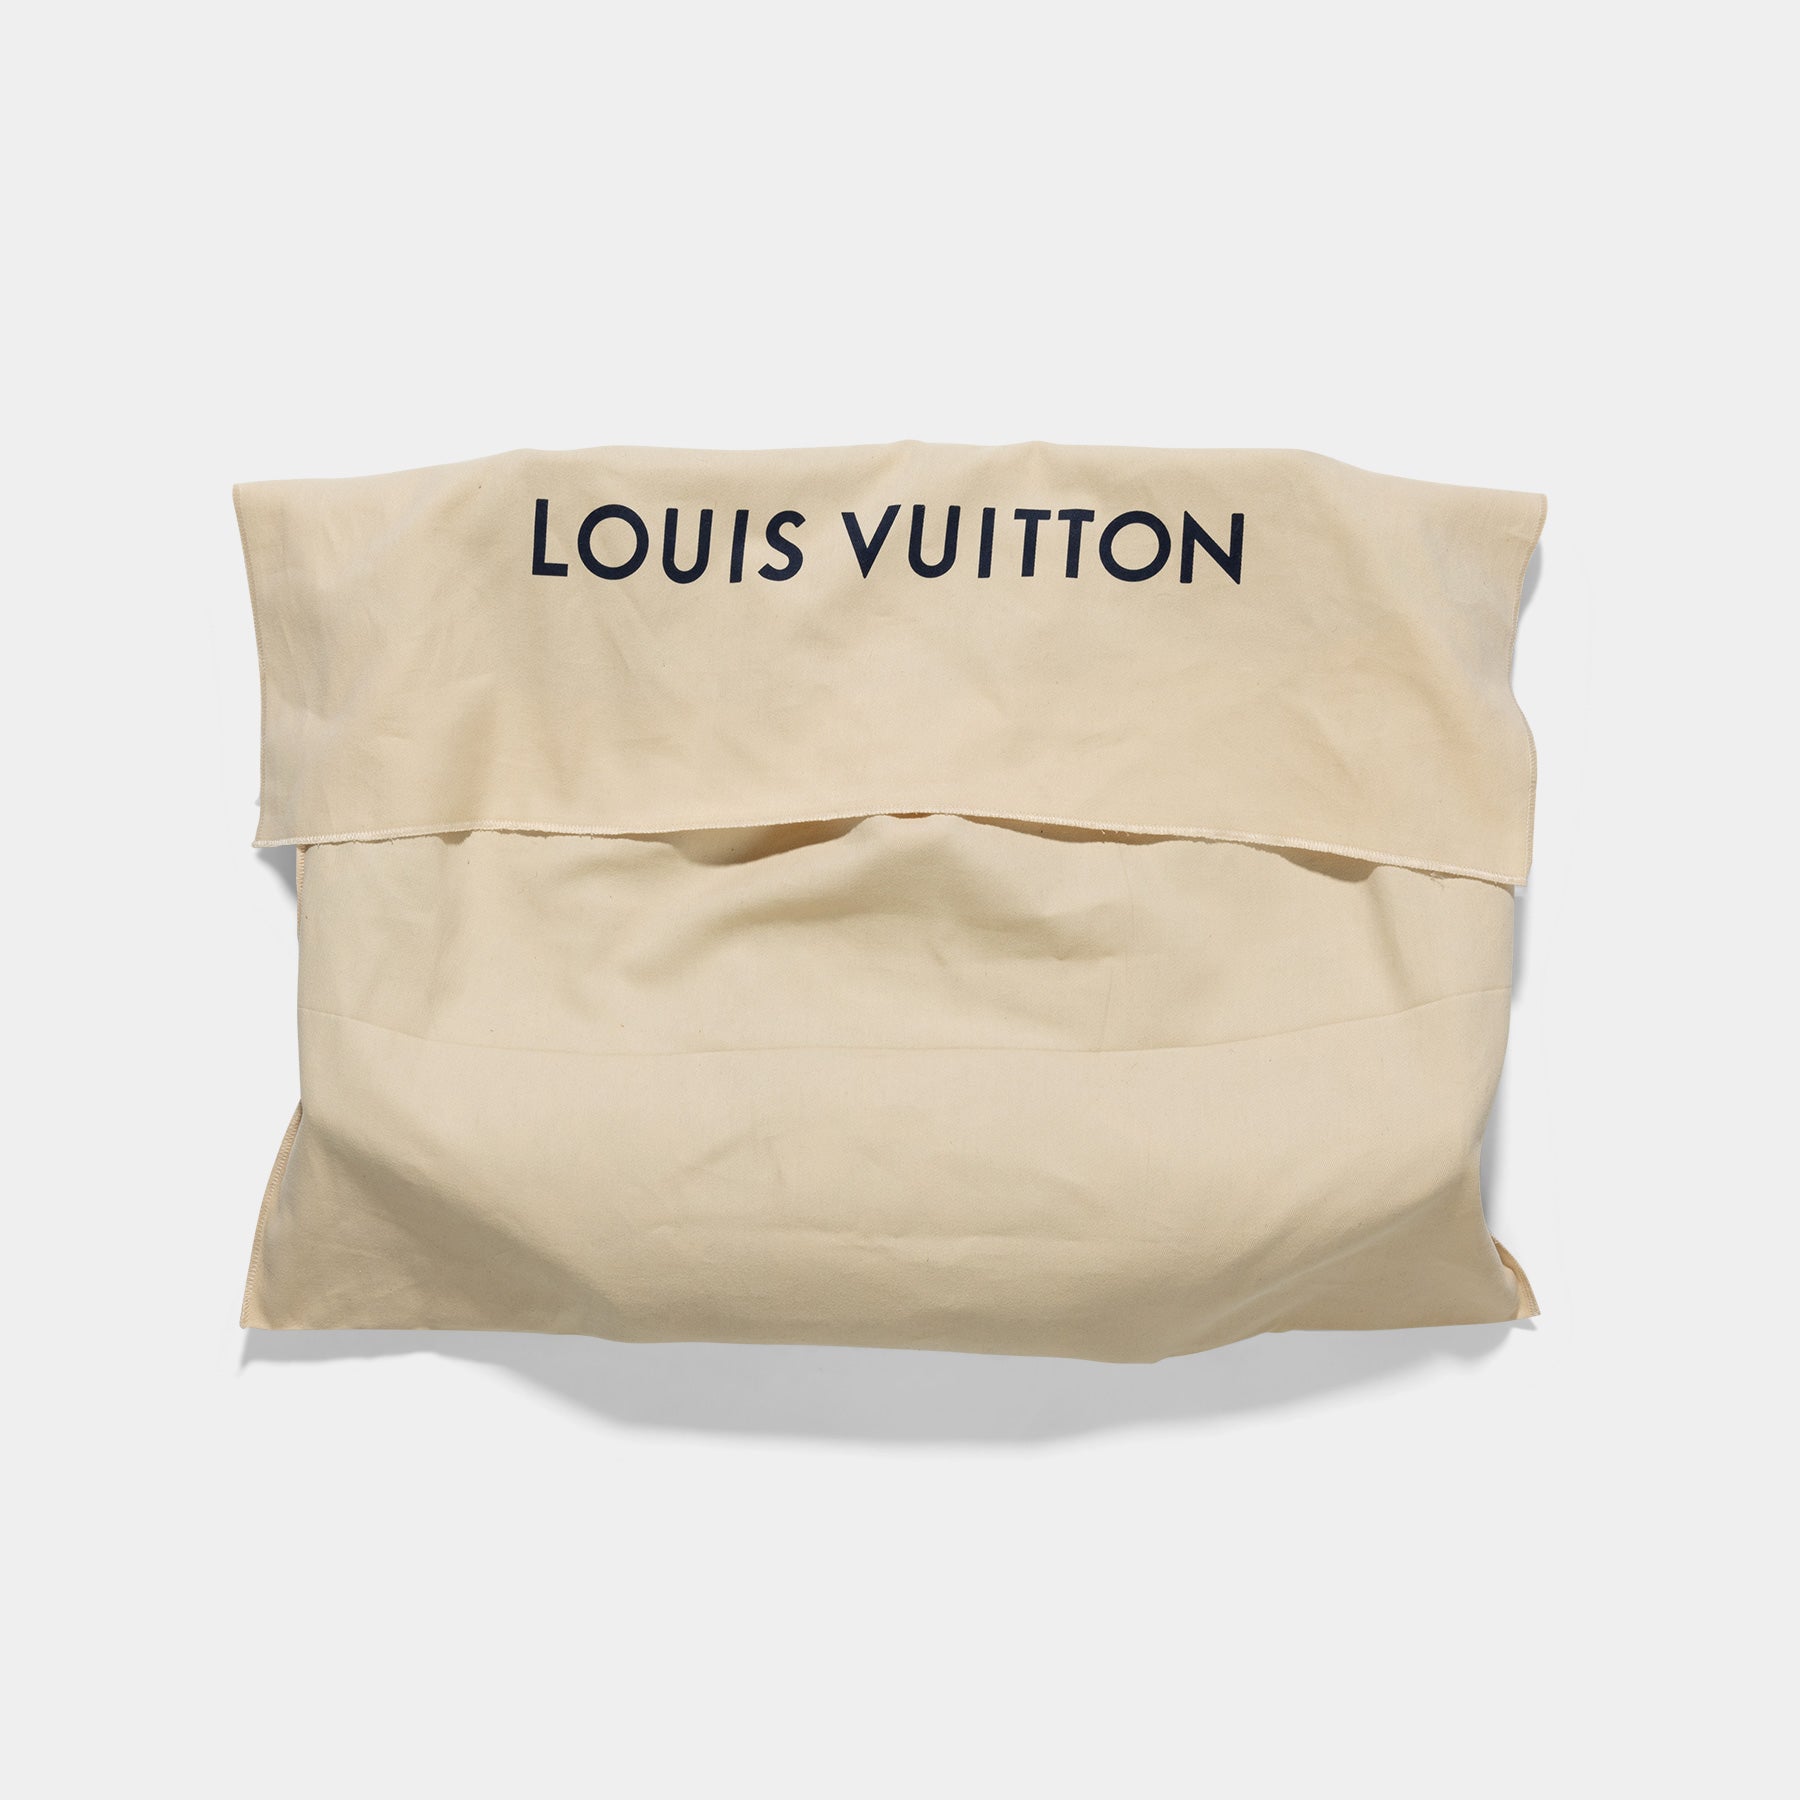 Louis Vuitton Monogramouflage Keepall. Done in conjunction with